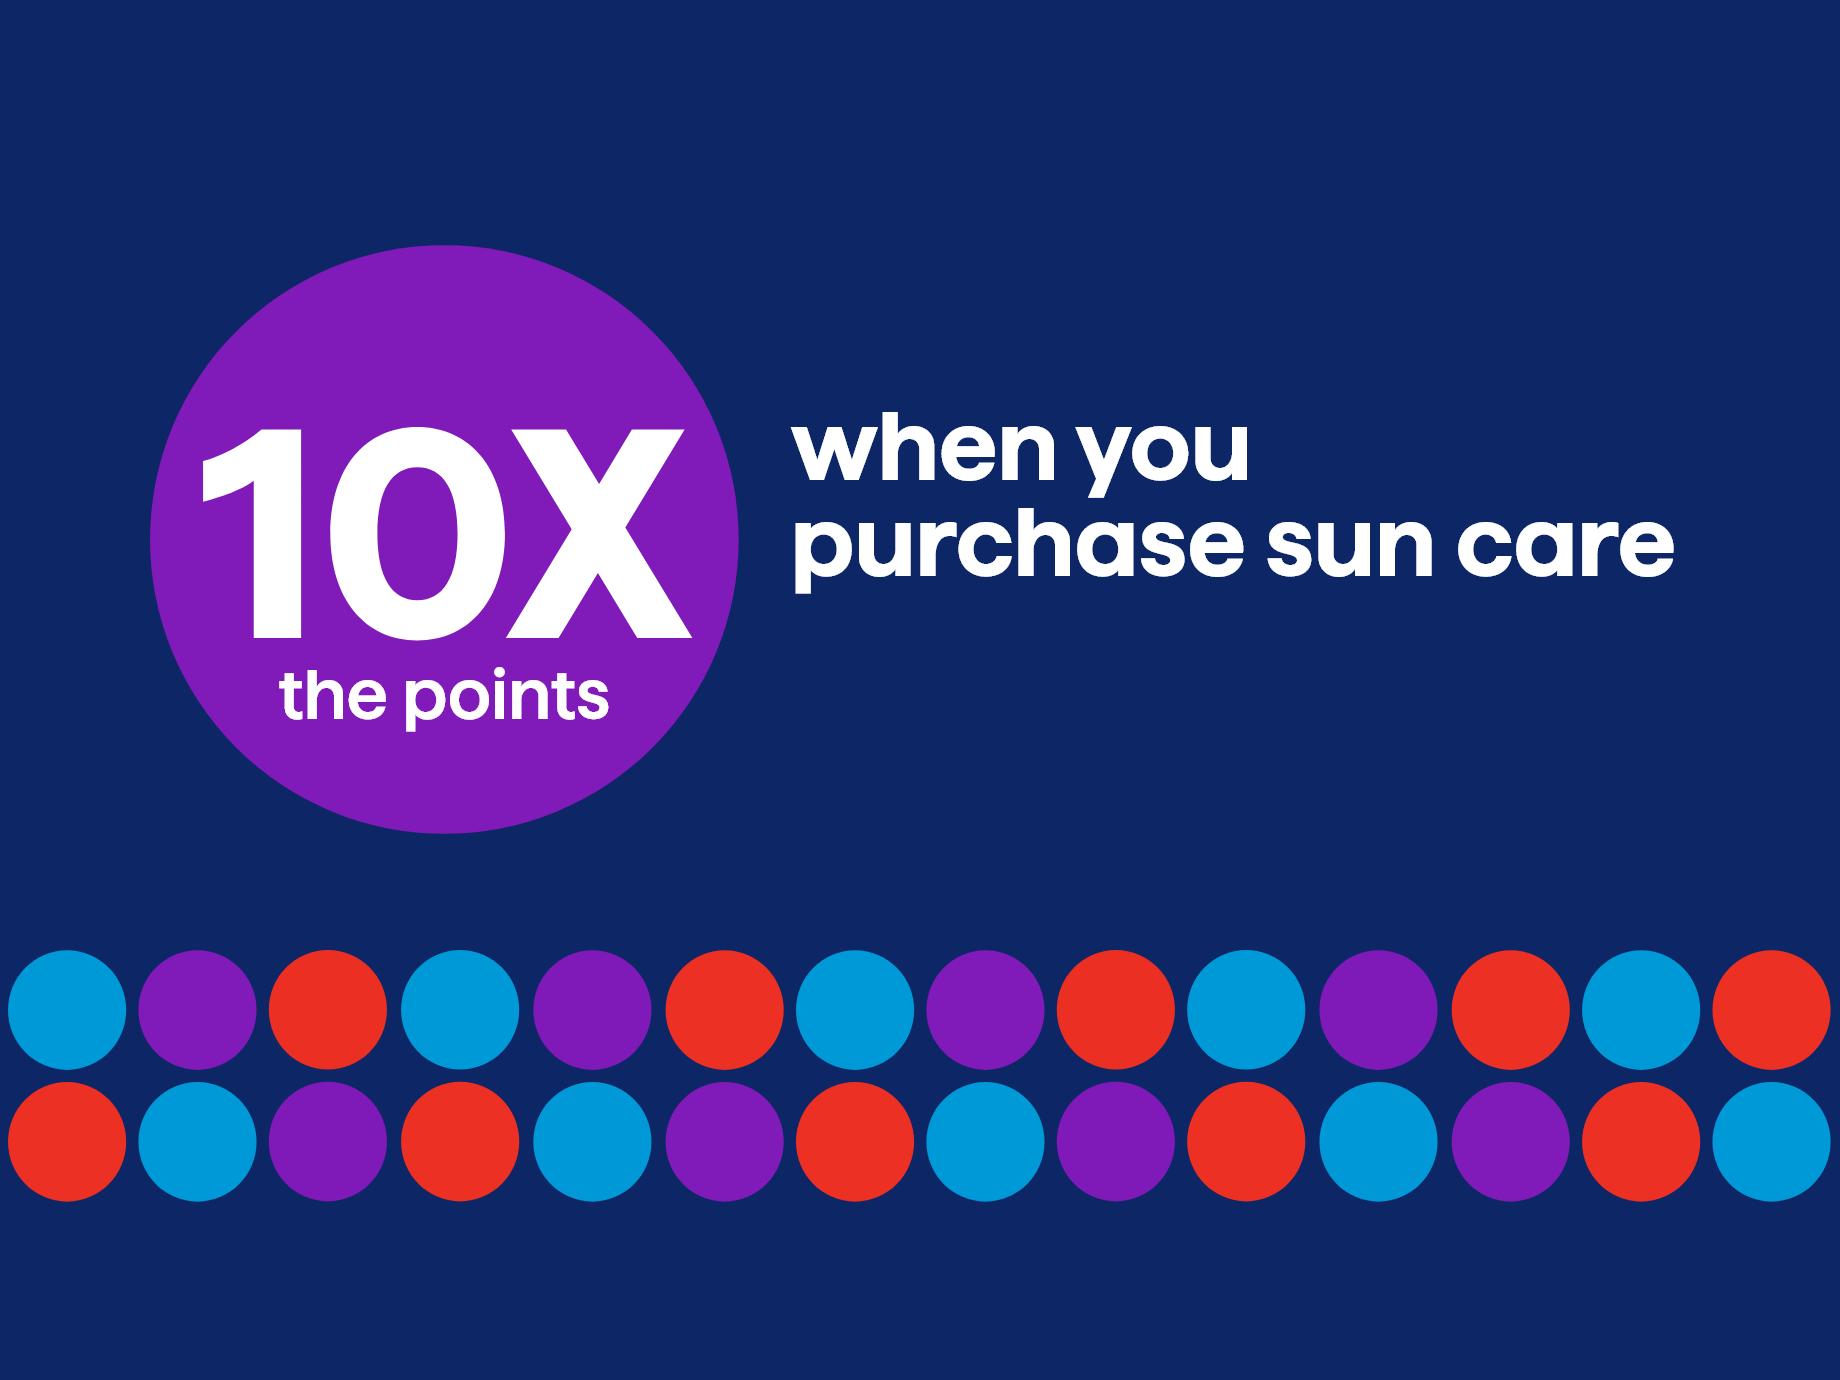 10X the points when you purchase sun care